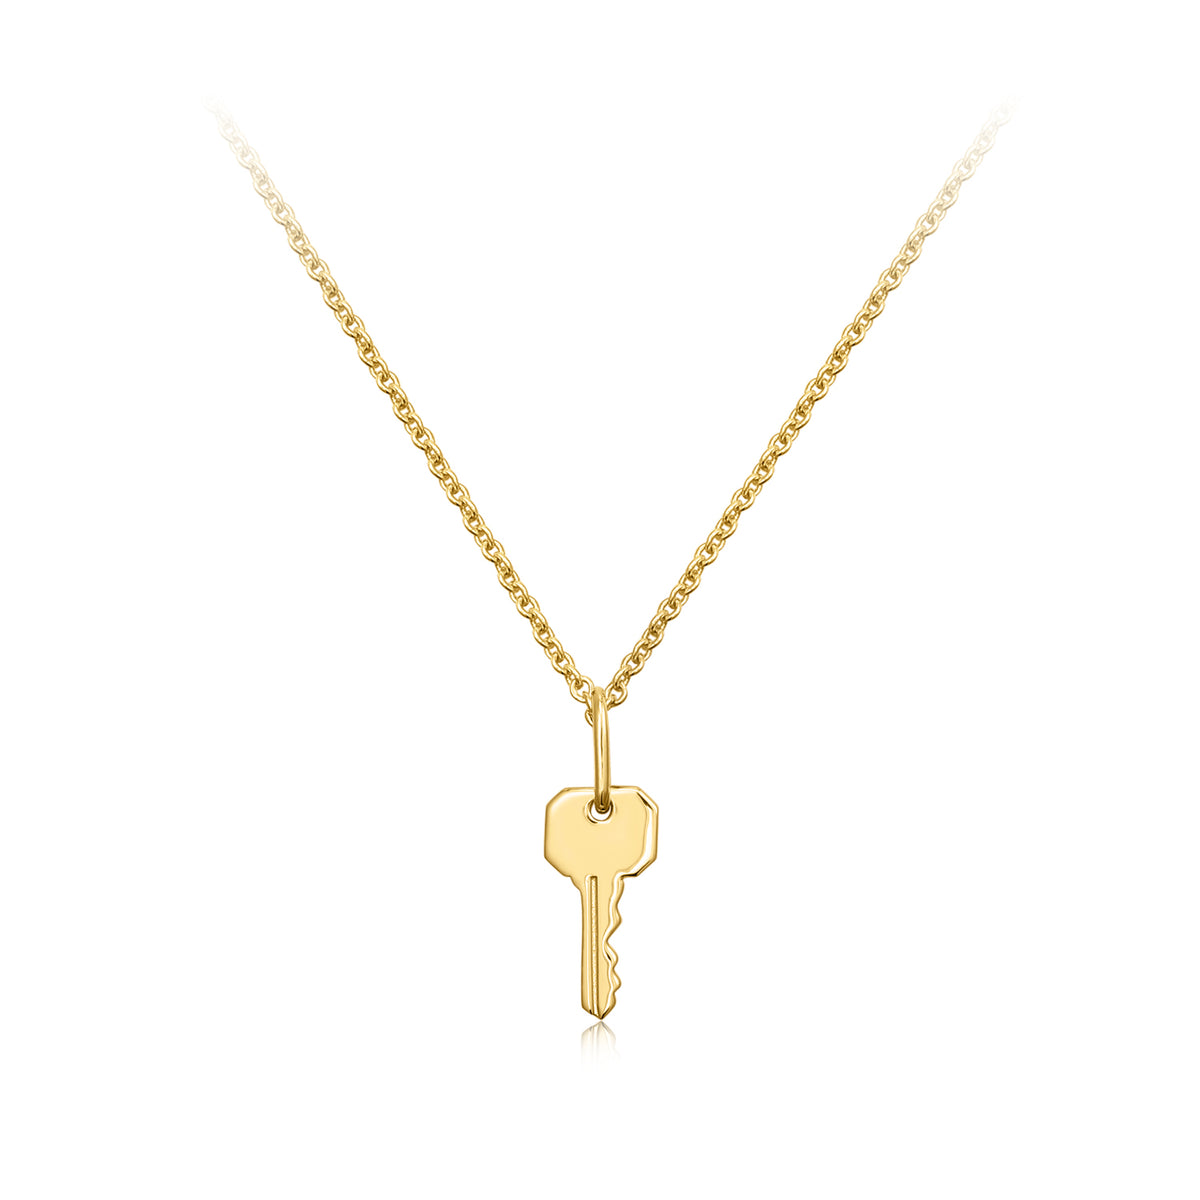 Love Collection | Kiawe Necklace | Gold Plated 925 Silver